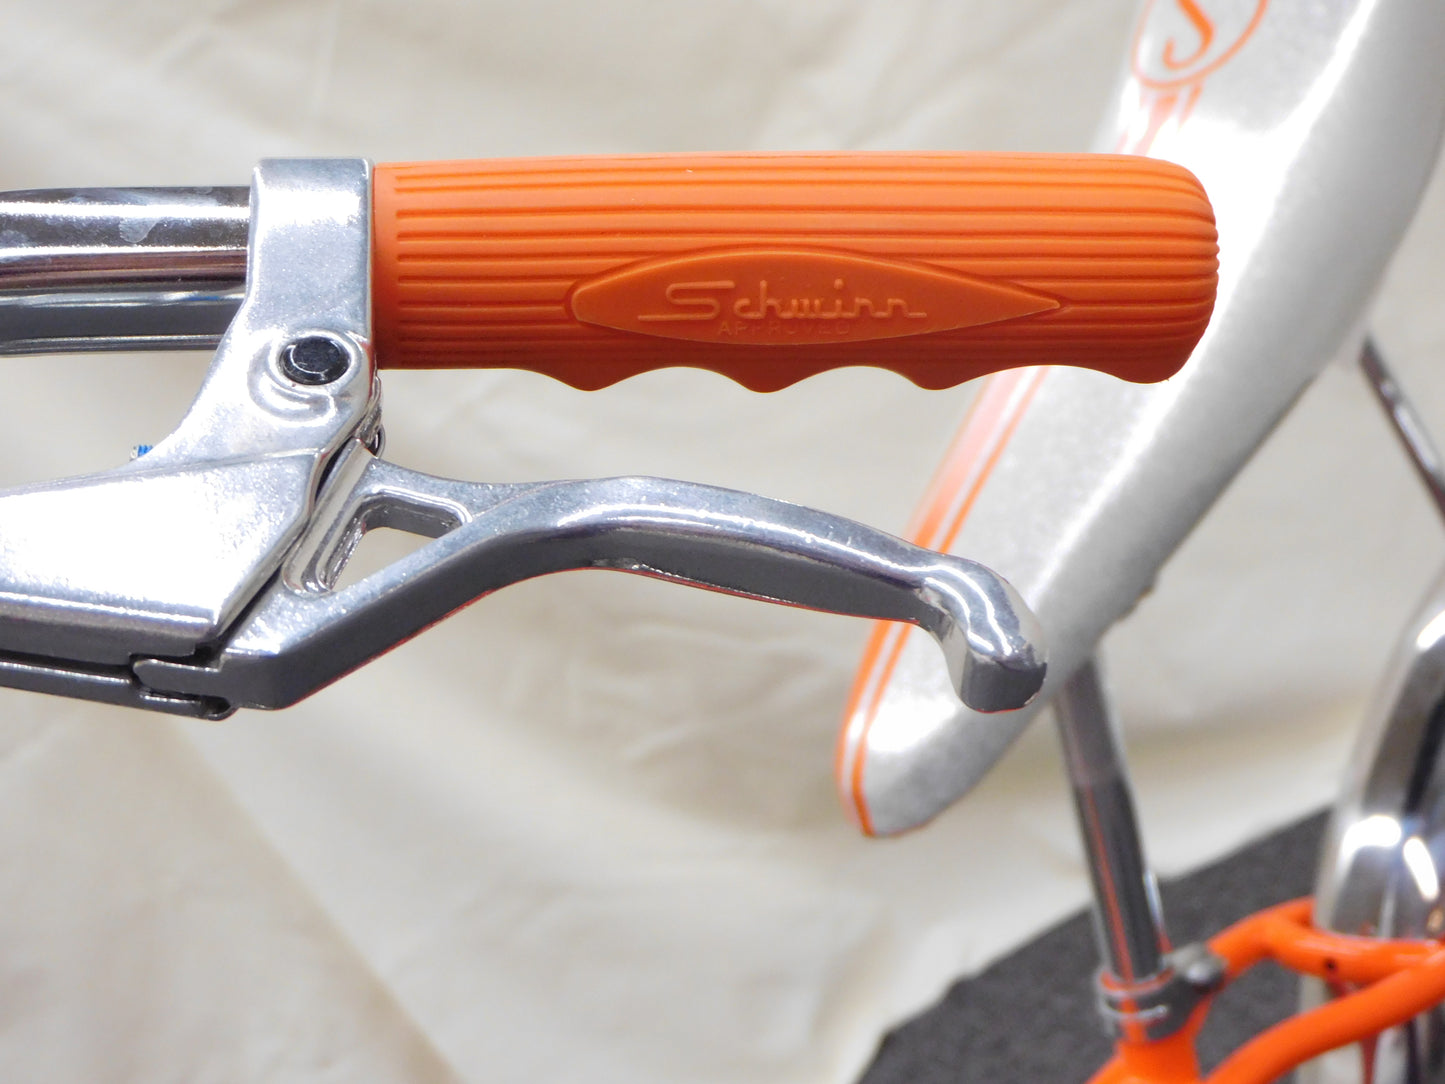 Schwinn Sting-Ray "Orange Krate" Limited Edition Reproduction